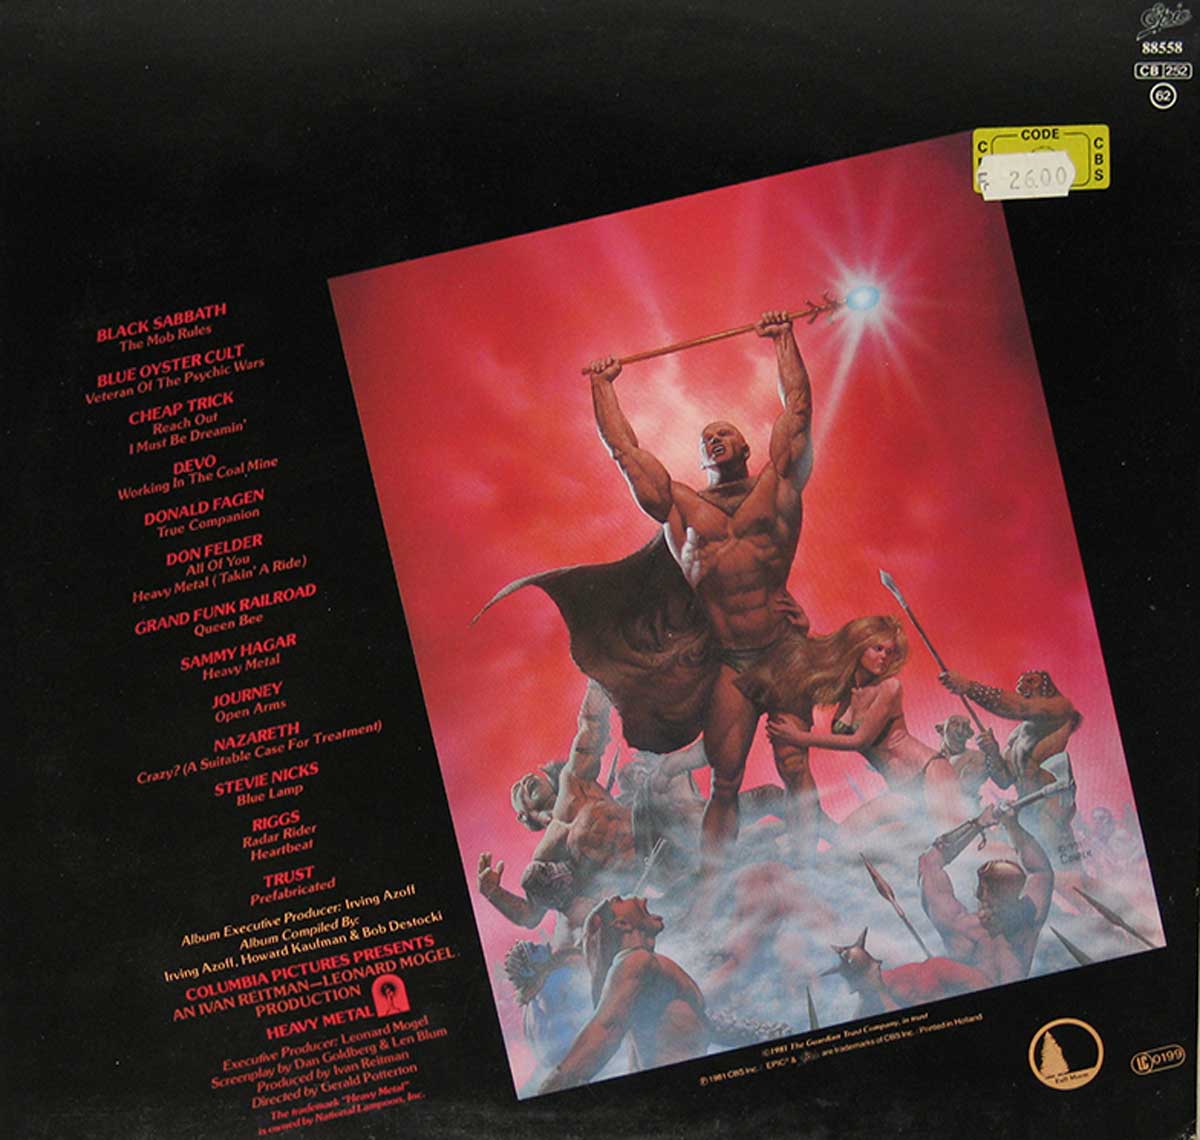 Back Cover  Photo of "Heavy Metal Music from the Motion Picture" Album